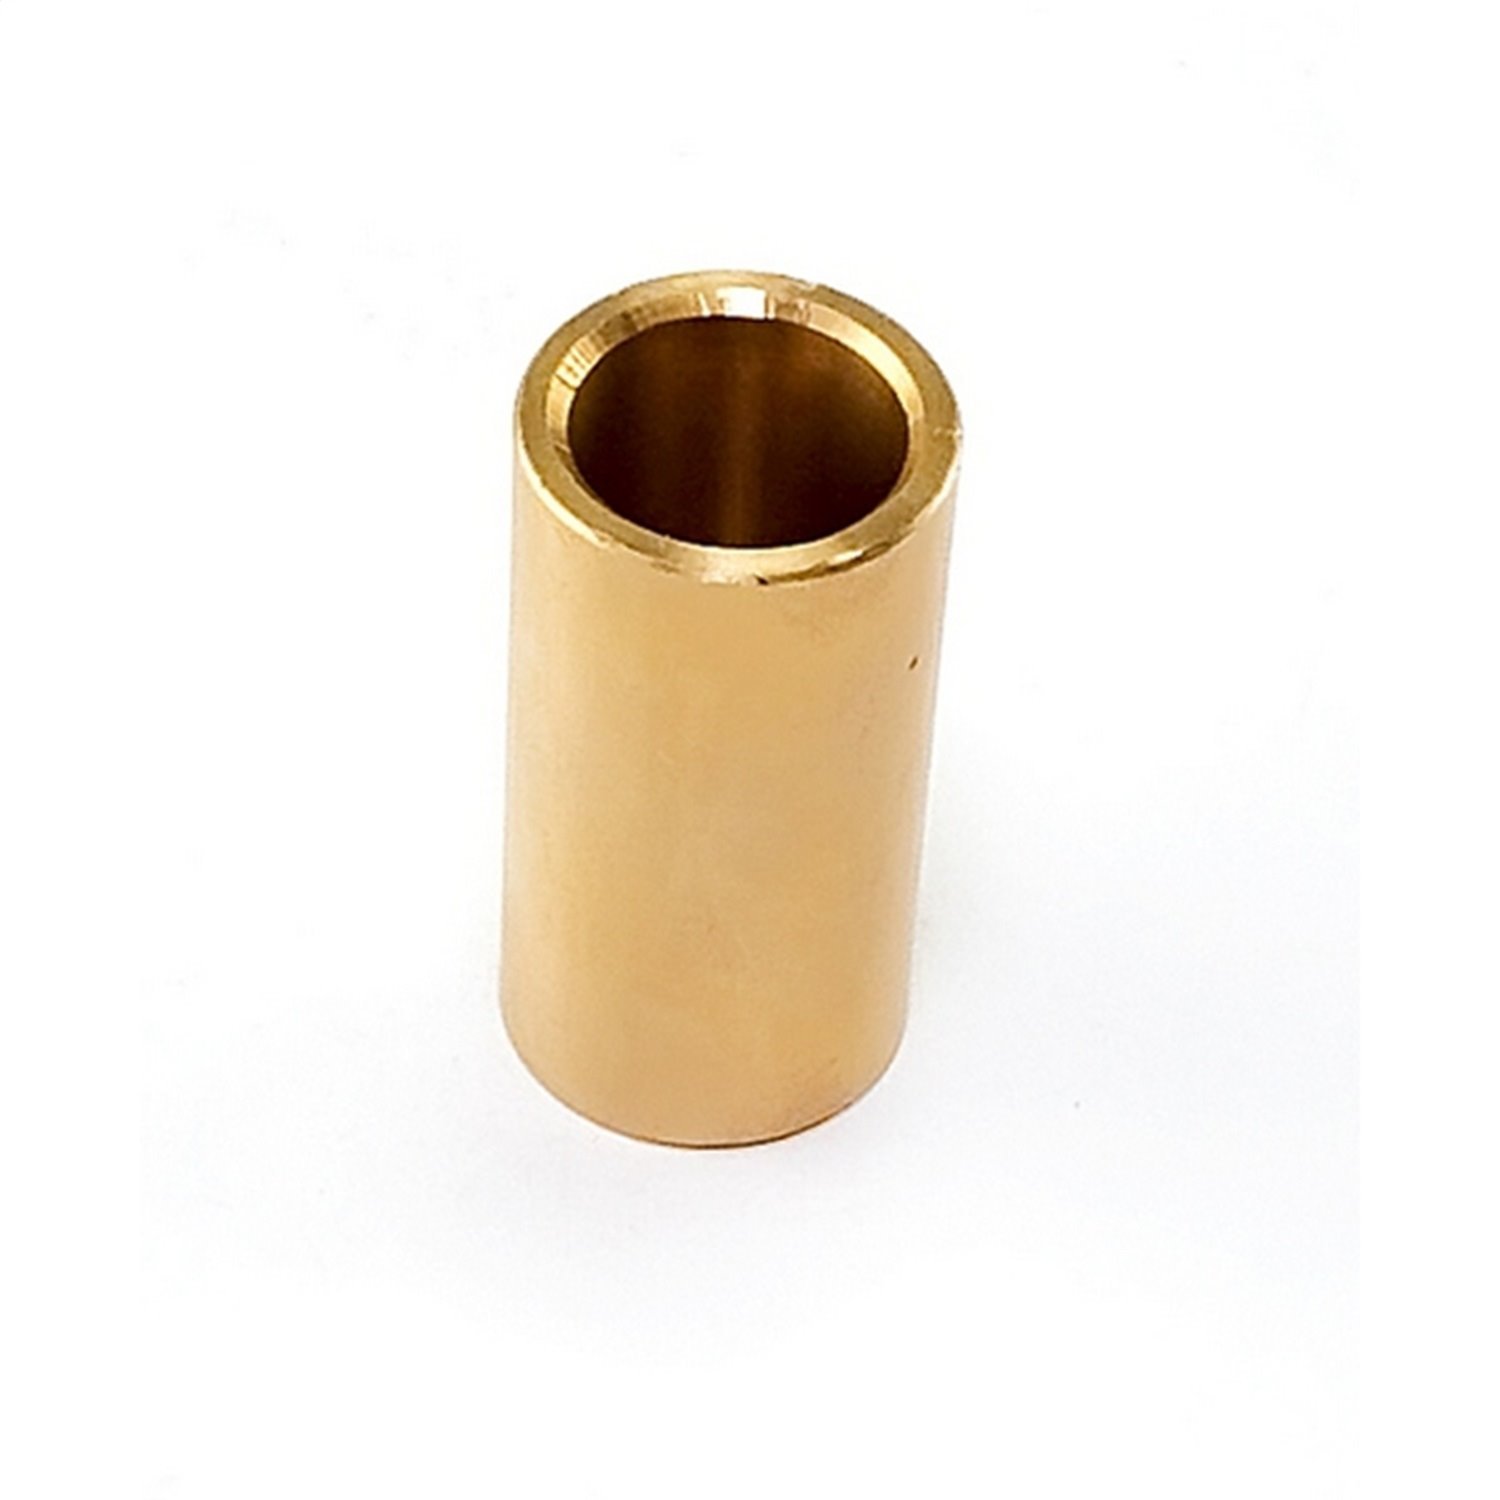 Replacement rear leaf spring bronze bushing from Omix-ADA,